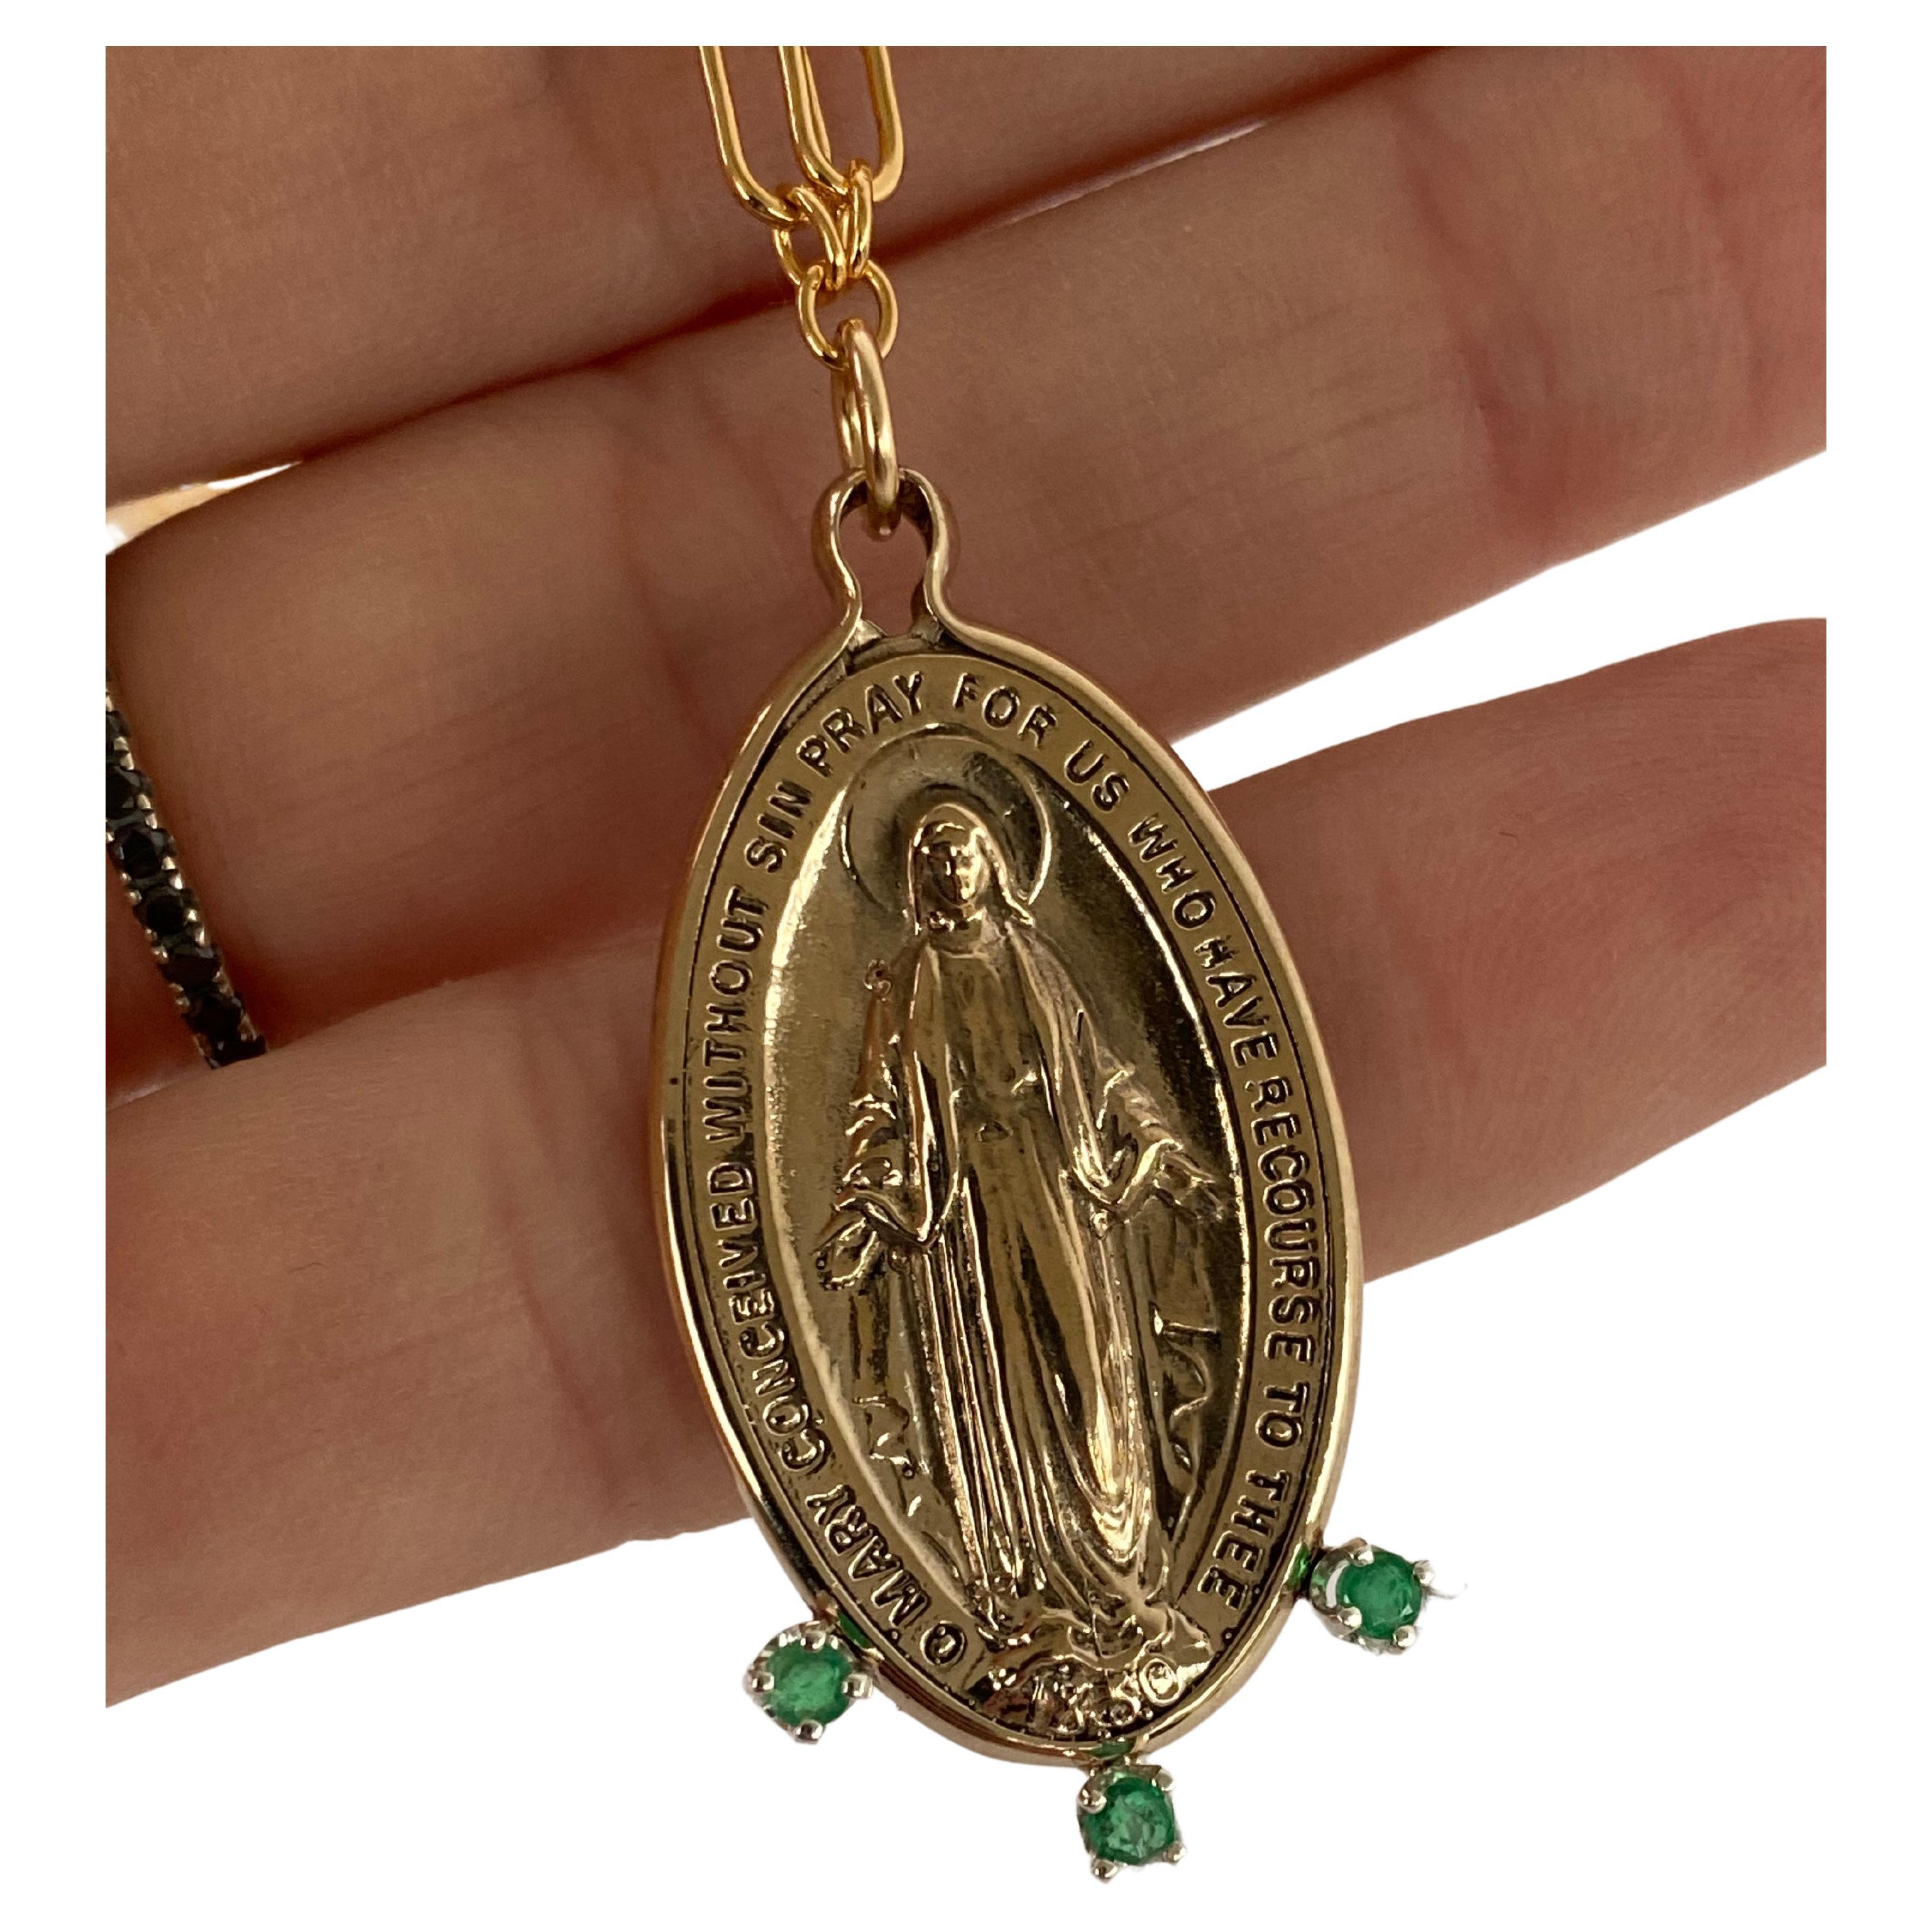 3 pcs of Emerald Virgin Mary Medal Chunky Chain Necklace Bronze Gold Filled J Dauphin

Exclusive piece of a Miraculous Medal Oval pendant called  